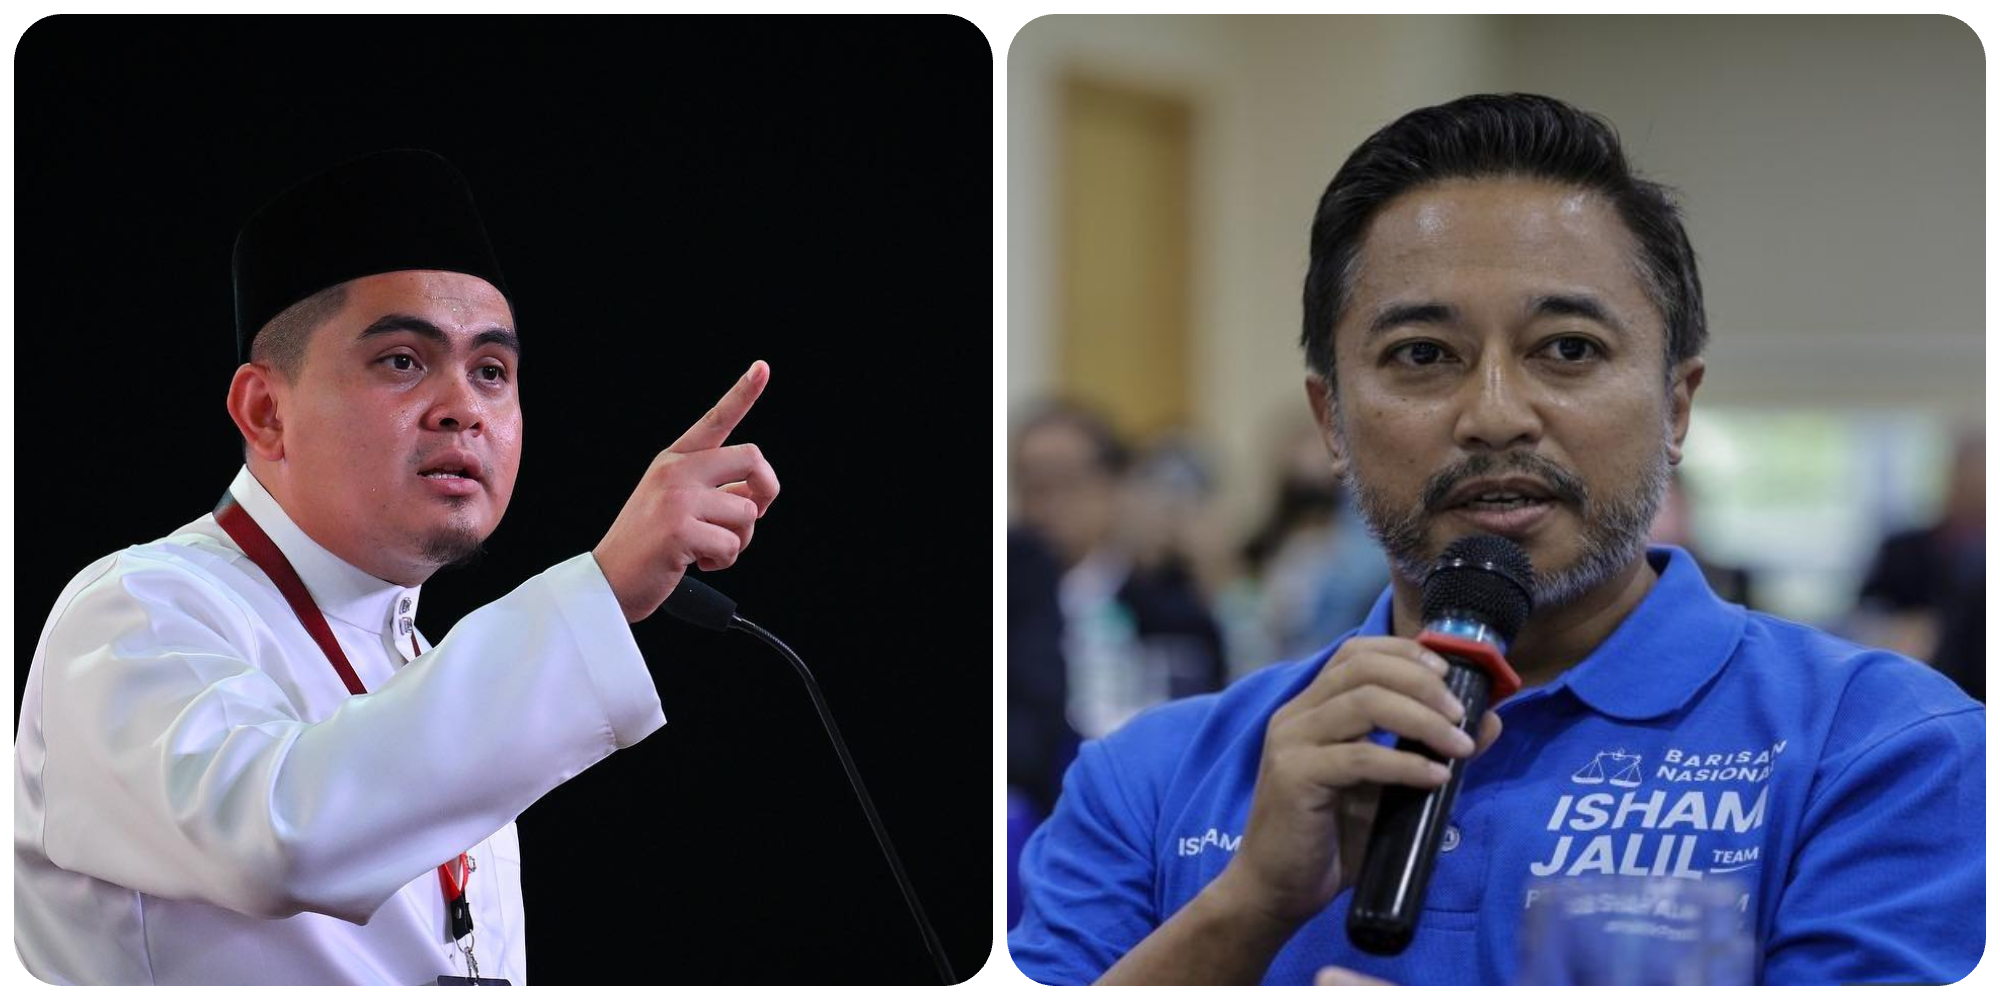 Who is lying? Akmal, Isham Jalil want govt to explain Zahid’s confirmation on royal order for Najib’s house arrest